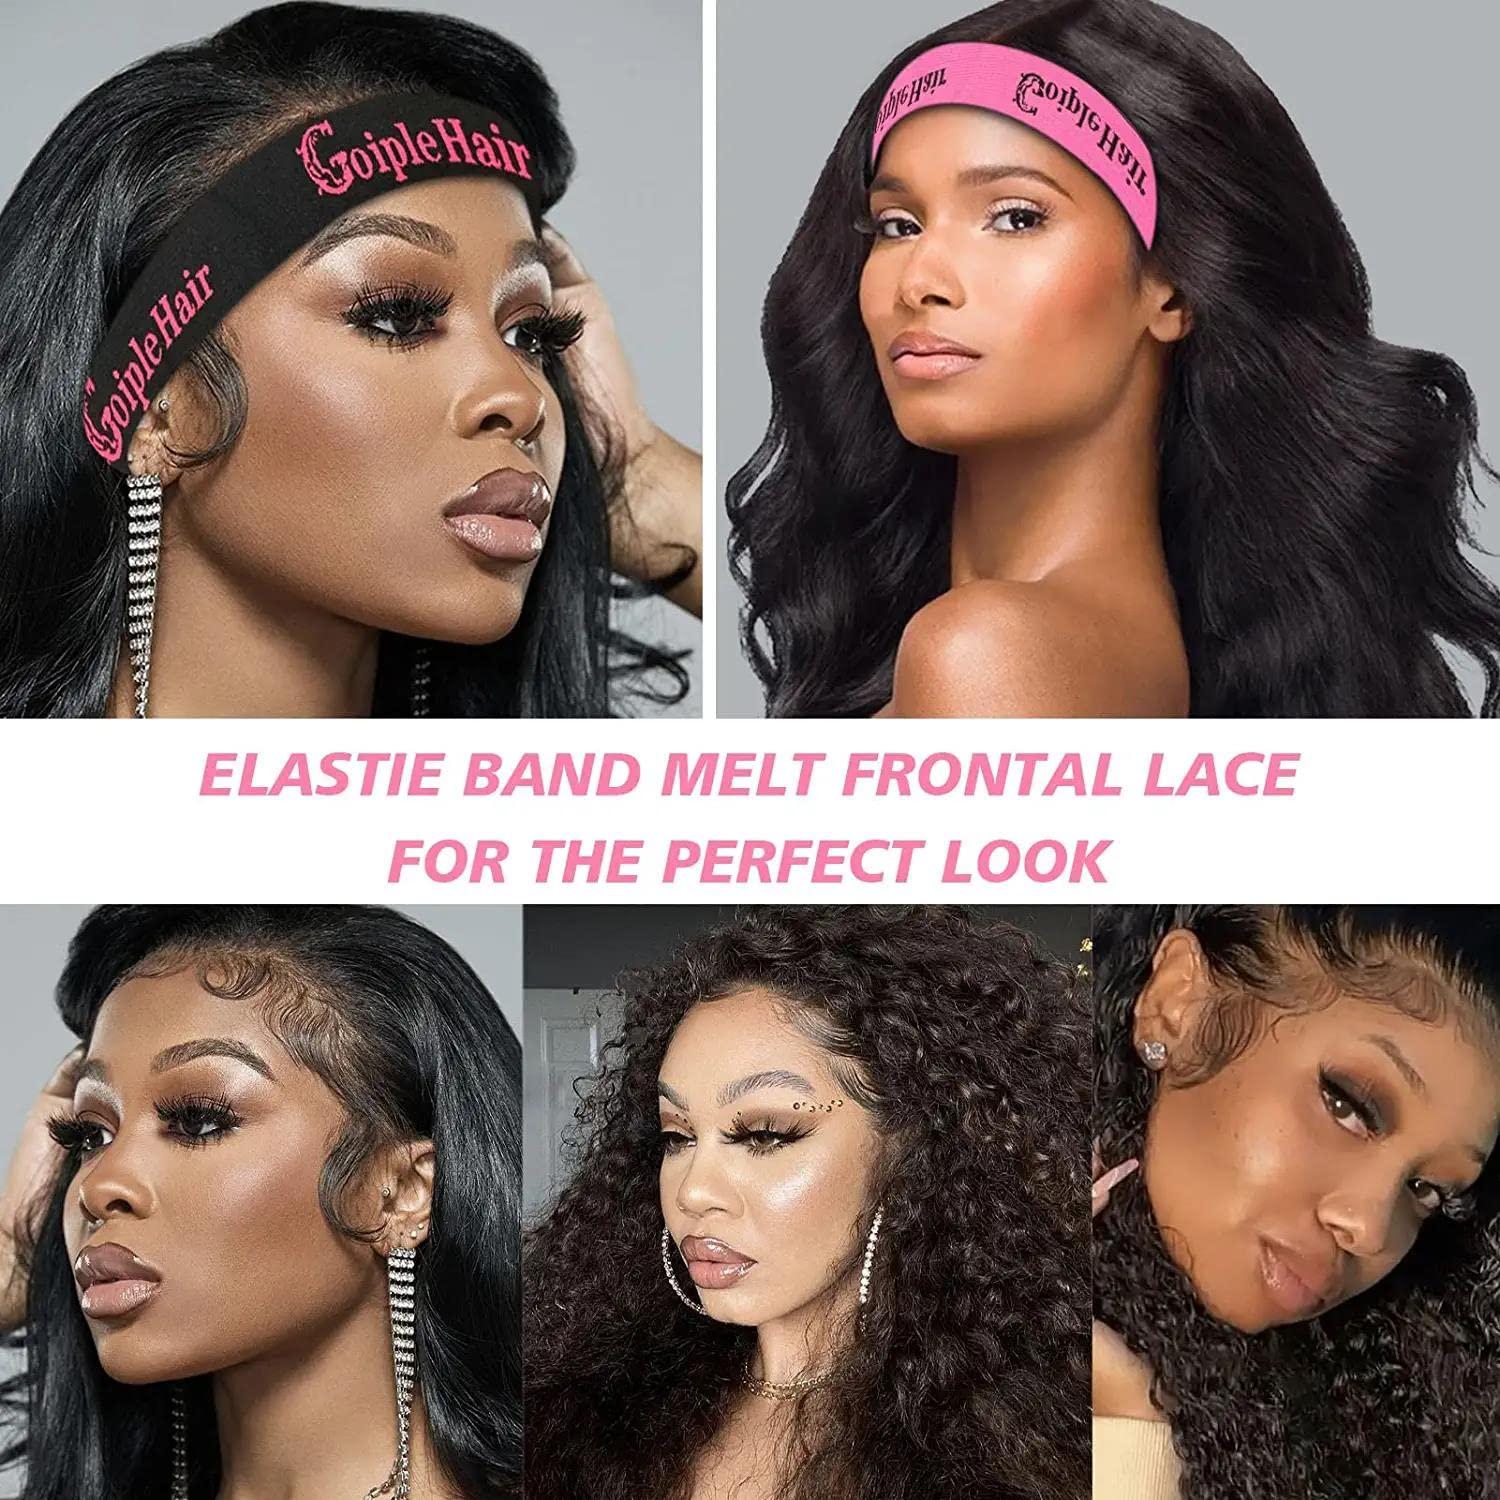 Goiple 3PCS Elastic Bands for Wig Edges - Elastic Band for Lace Frontal Melt  Wig Melt Band for Lace Front Laying Edges - Adjustable Wig Band for Edges  Wig Install Accessories with